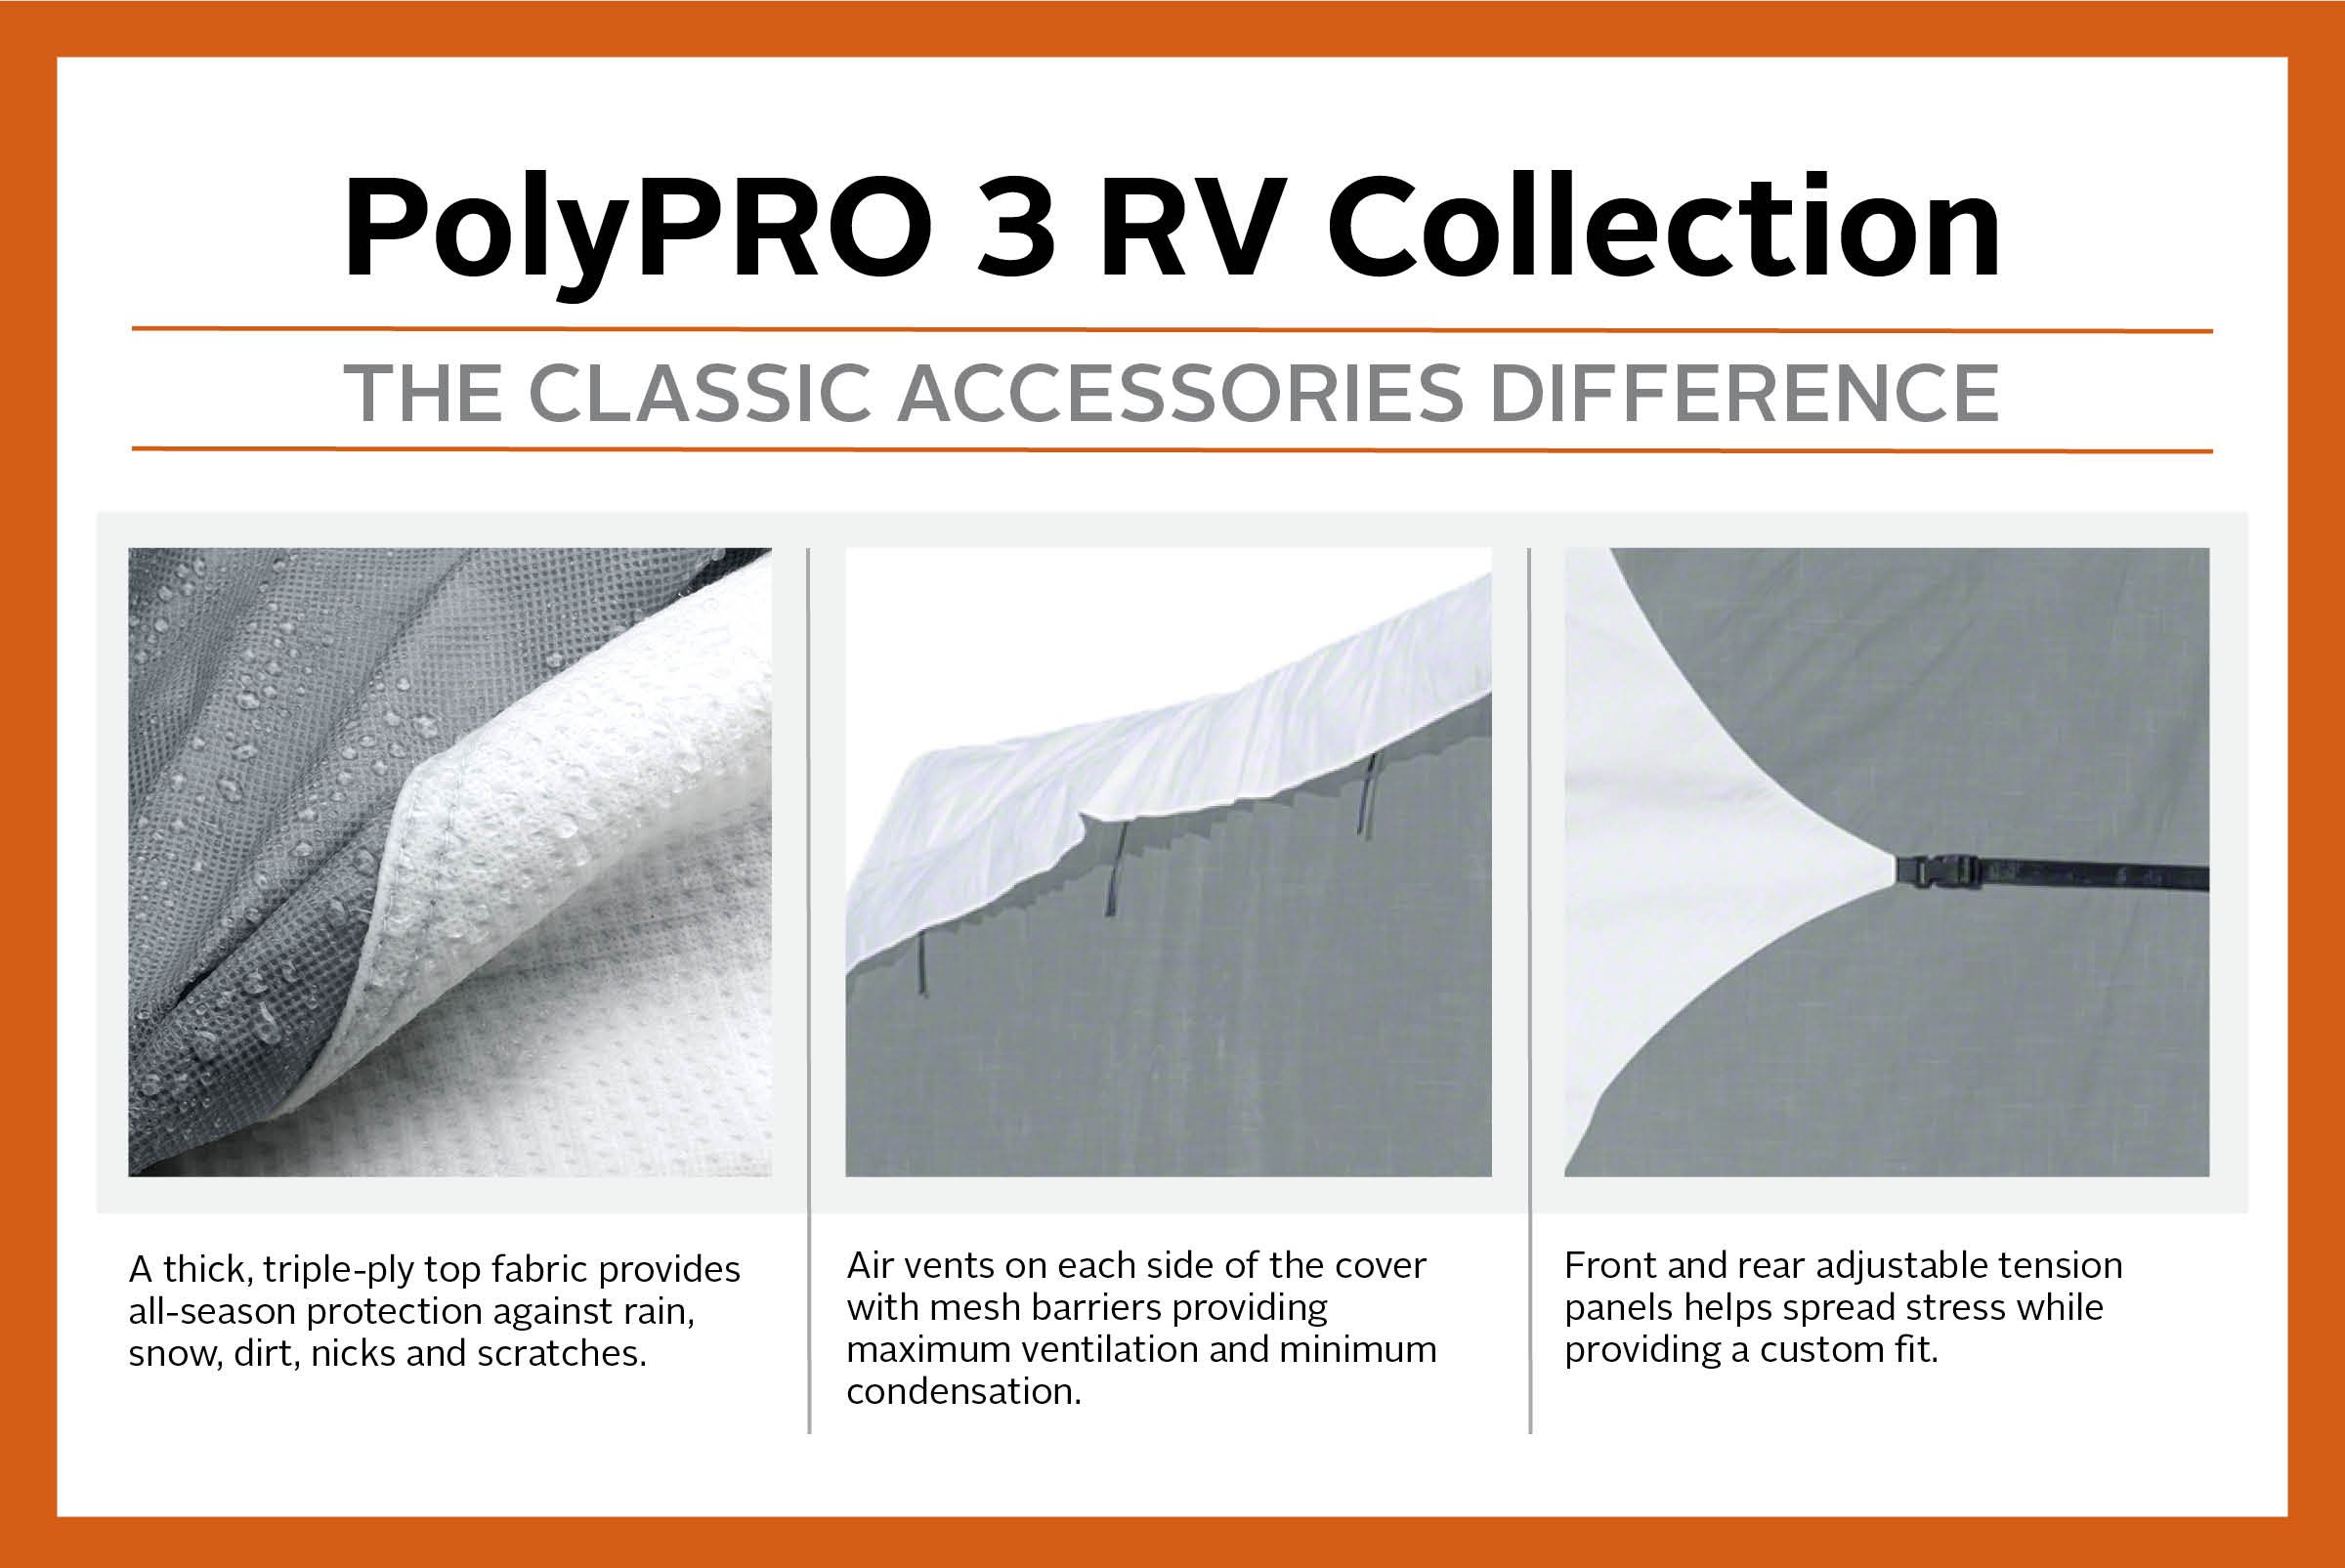 Classic Accessories Over Drive PolyPRO 3 Molded Fiberglass Travel Trailer Cover, Fits 11' - 13' Trailers, Camper RV Cover, Customizable Fit, All Season Protection for Motorhome, Grey/White